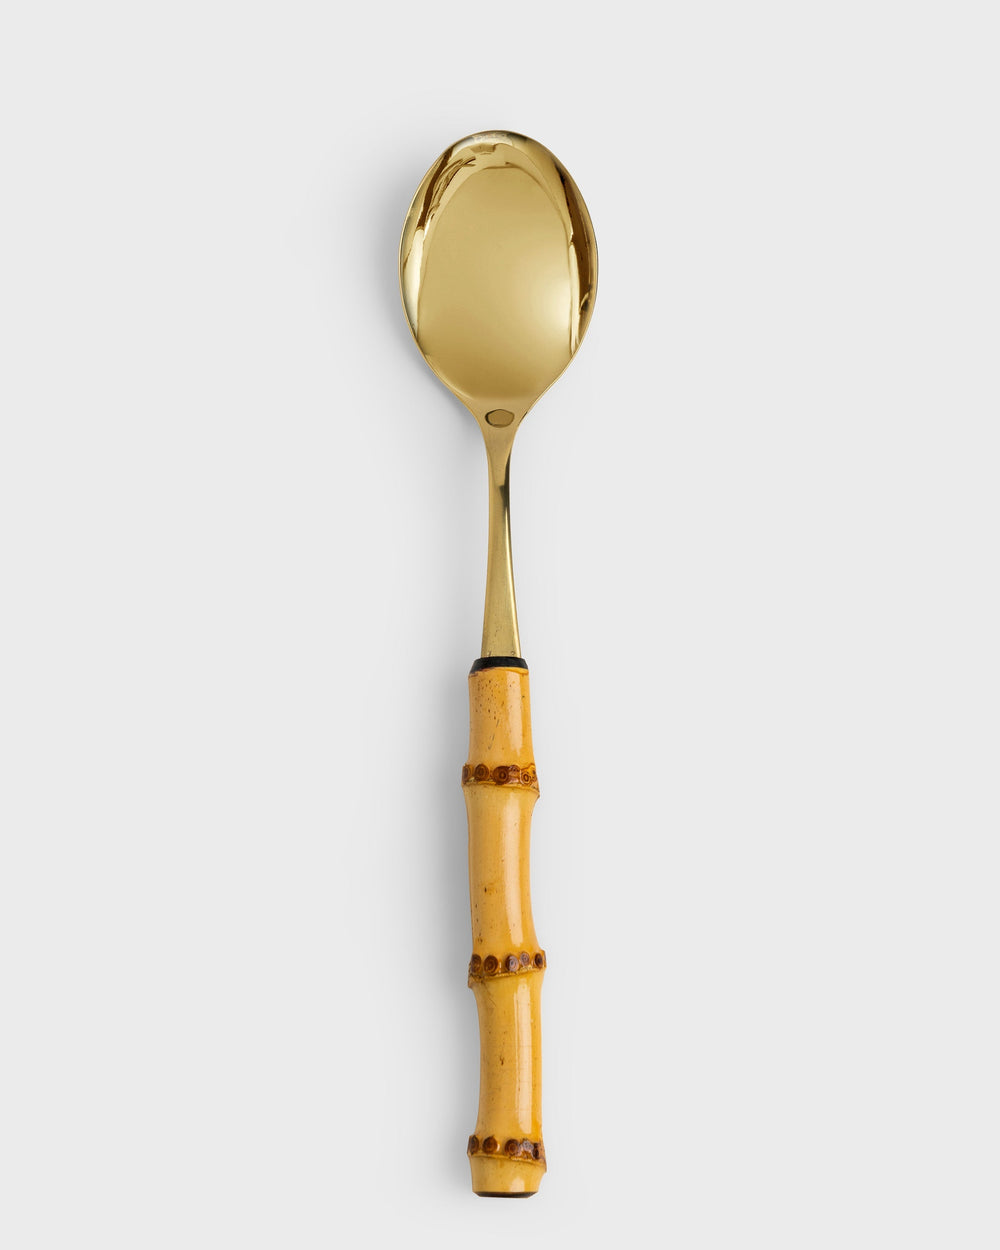 Tania Bulhoes Serving Spoon Angra Gold-Plated Stainless Steel Bamboo